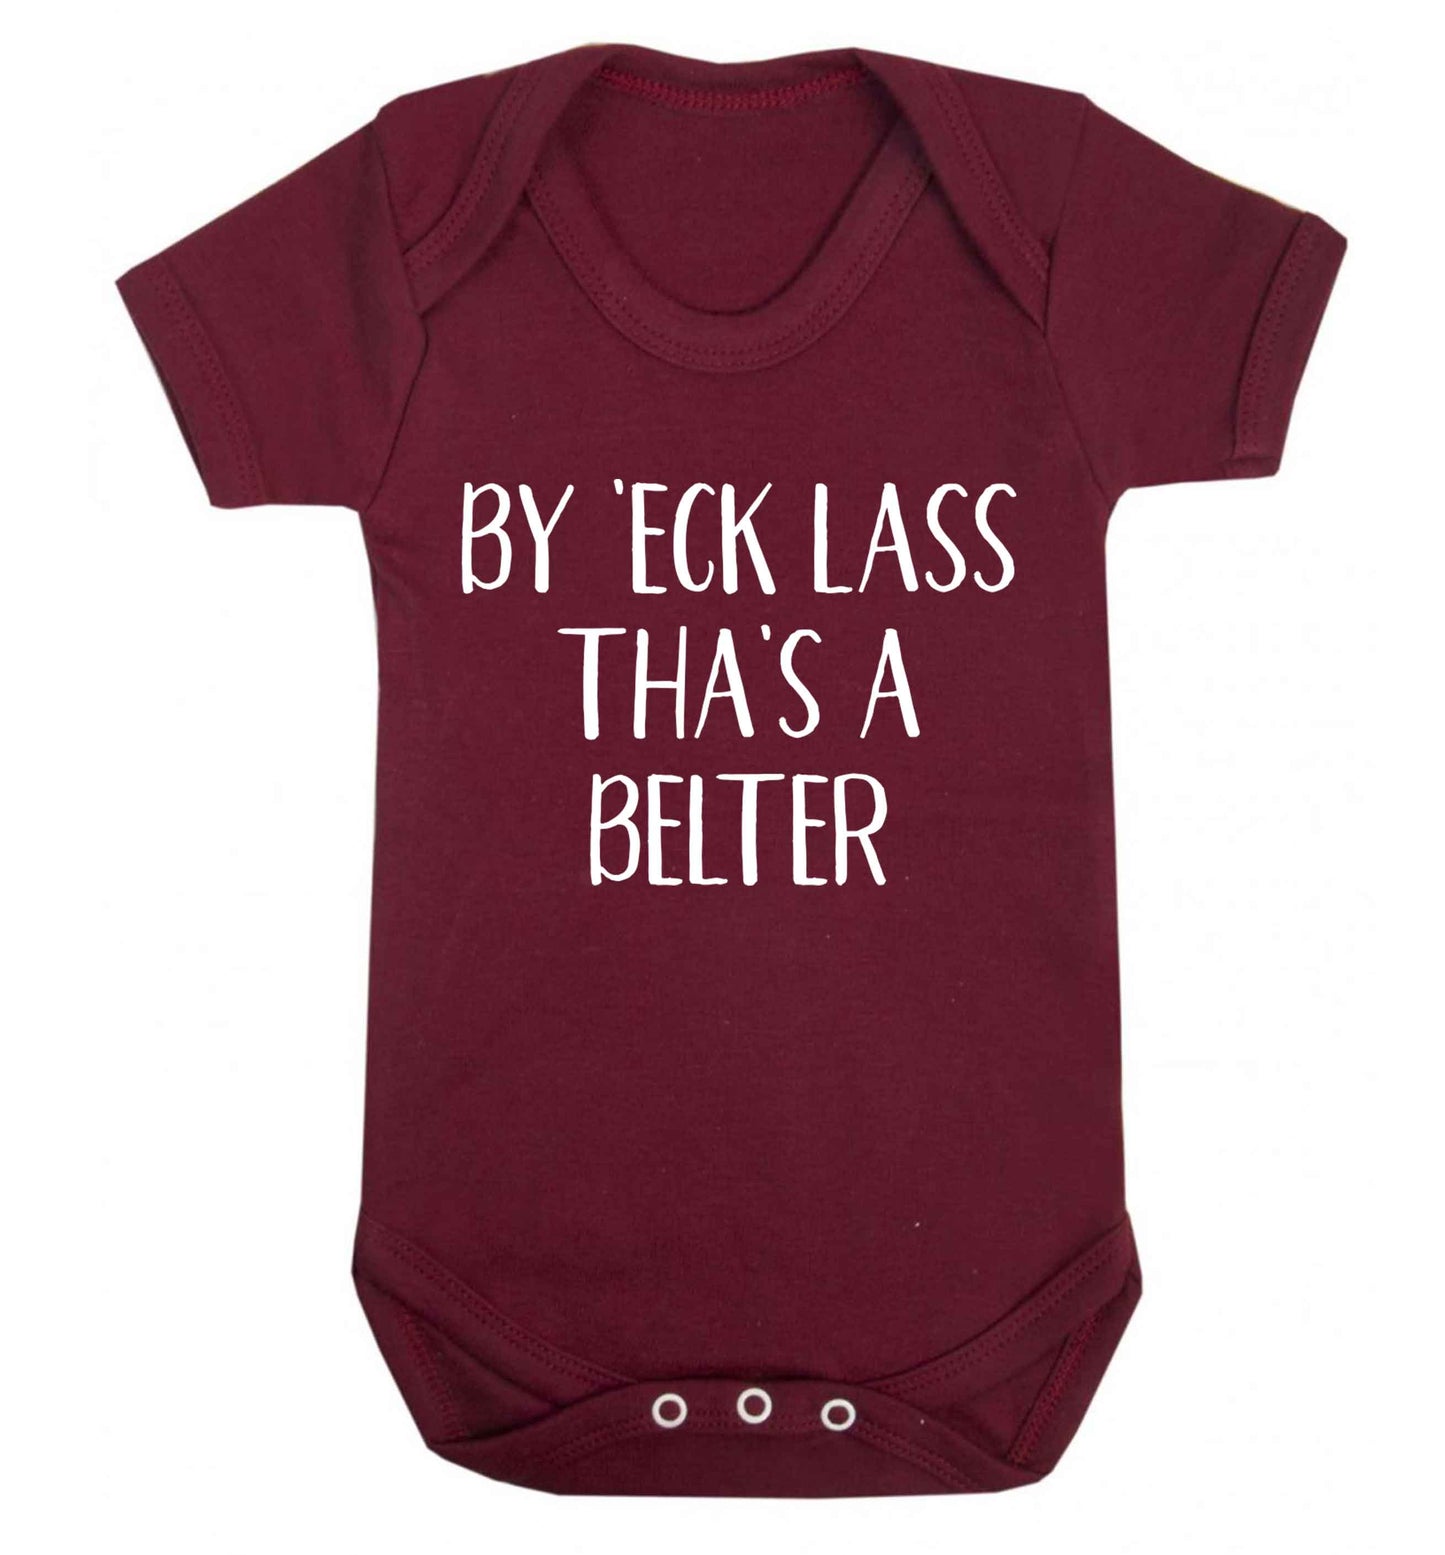 Be 'eck lass tha's a belter Baby Vest maroon 18-24 months